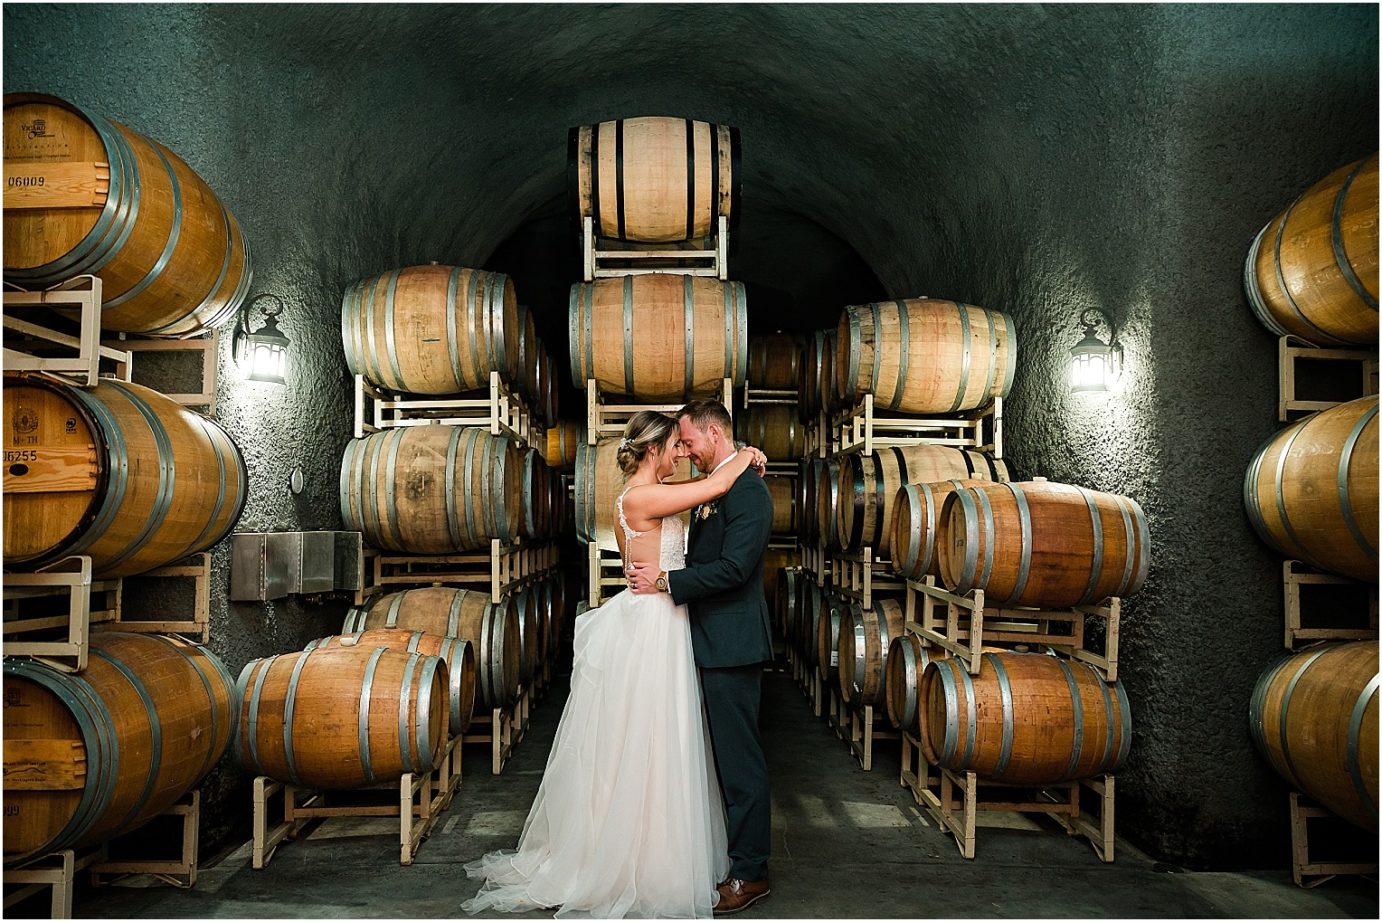 Portraits in wine cave for wedding at Terra Blanca Winery